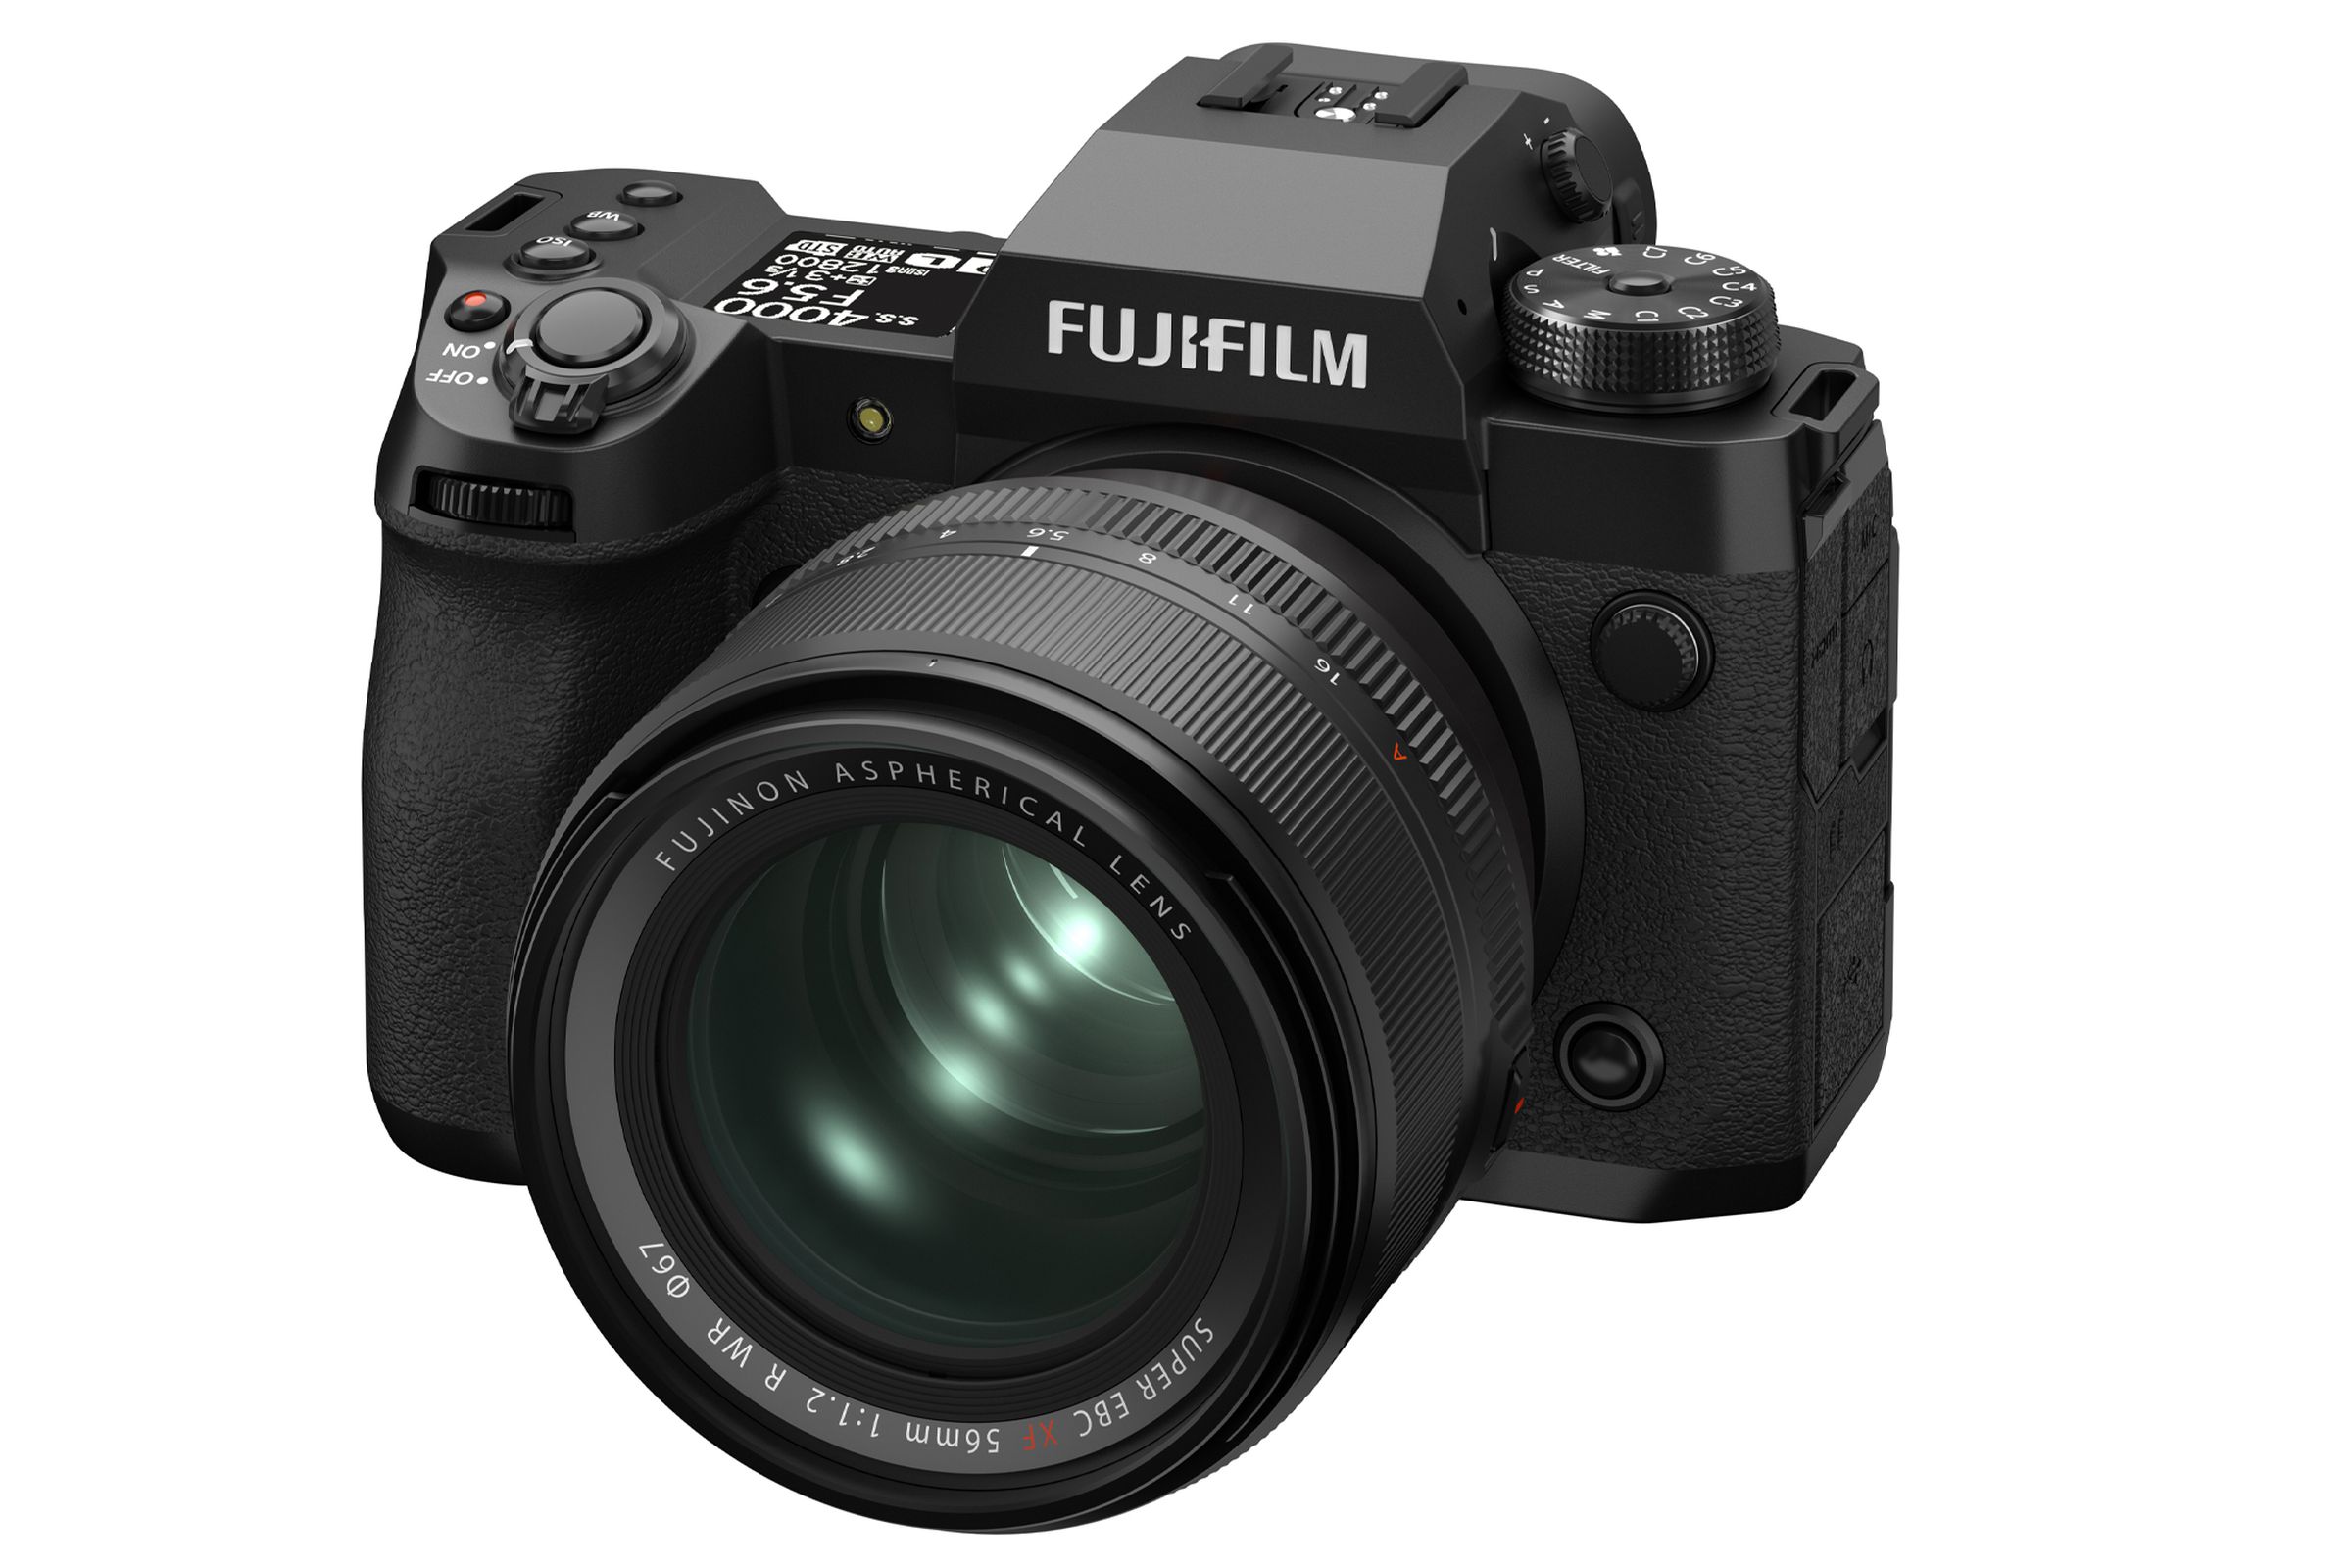 A three-quarters view of the Fujifilm X-H2 camera with new 56mm f/1.2 lens mounted to it.